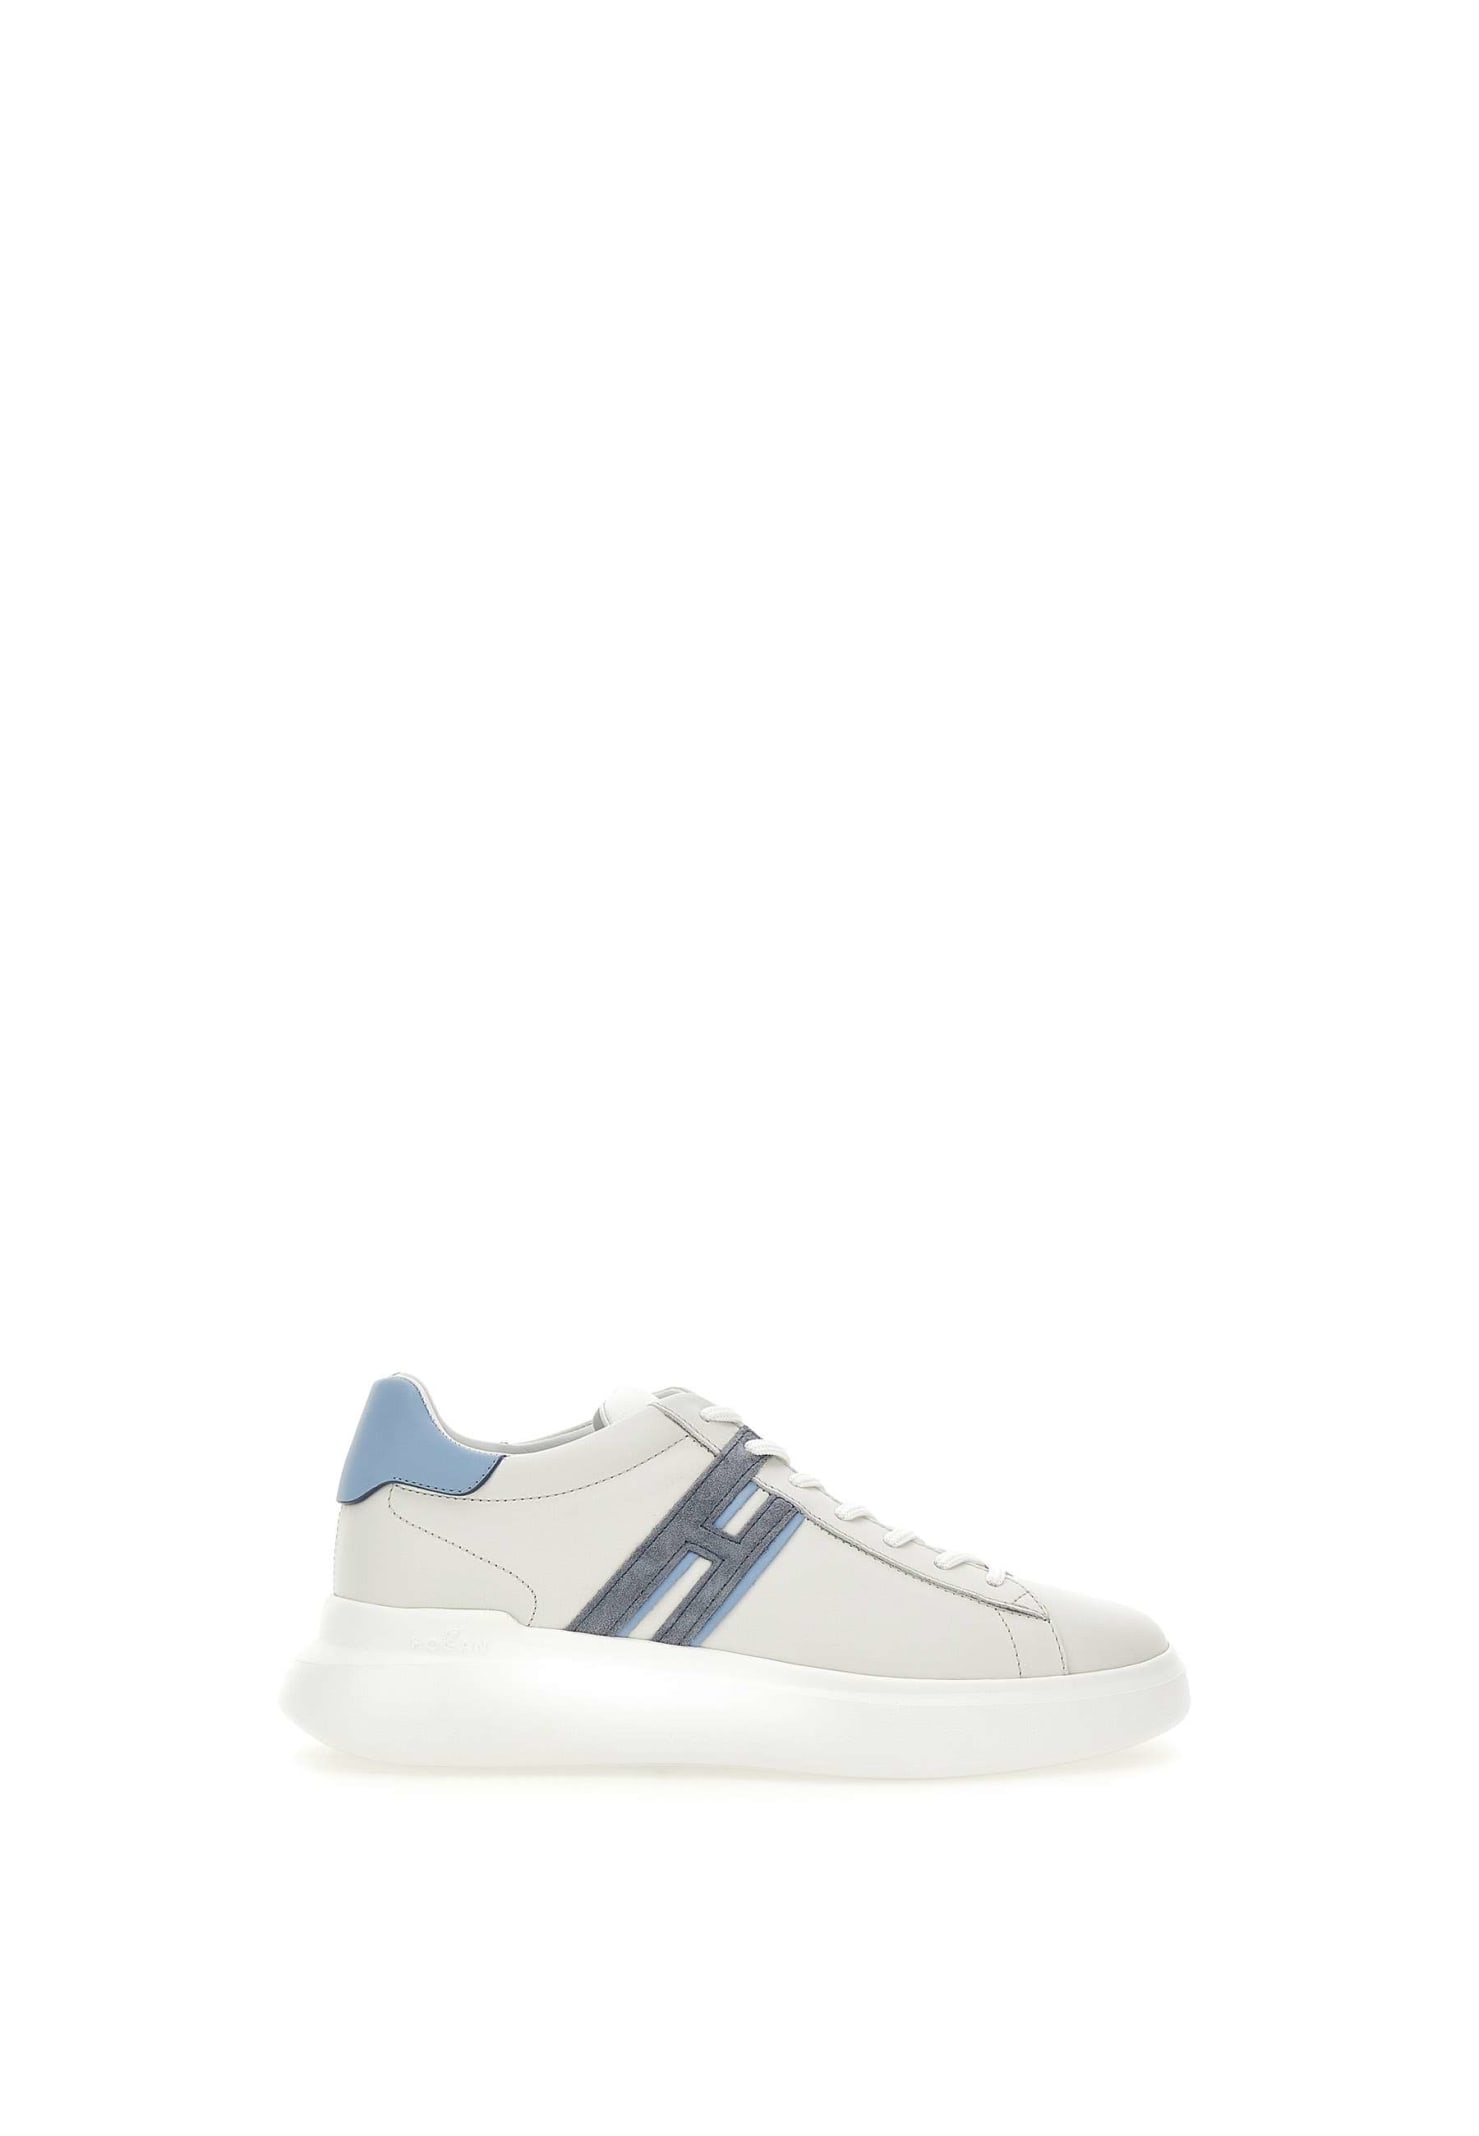 Hogan H580 Leather Sneakers In White